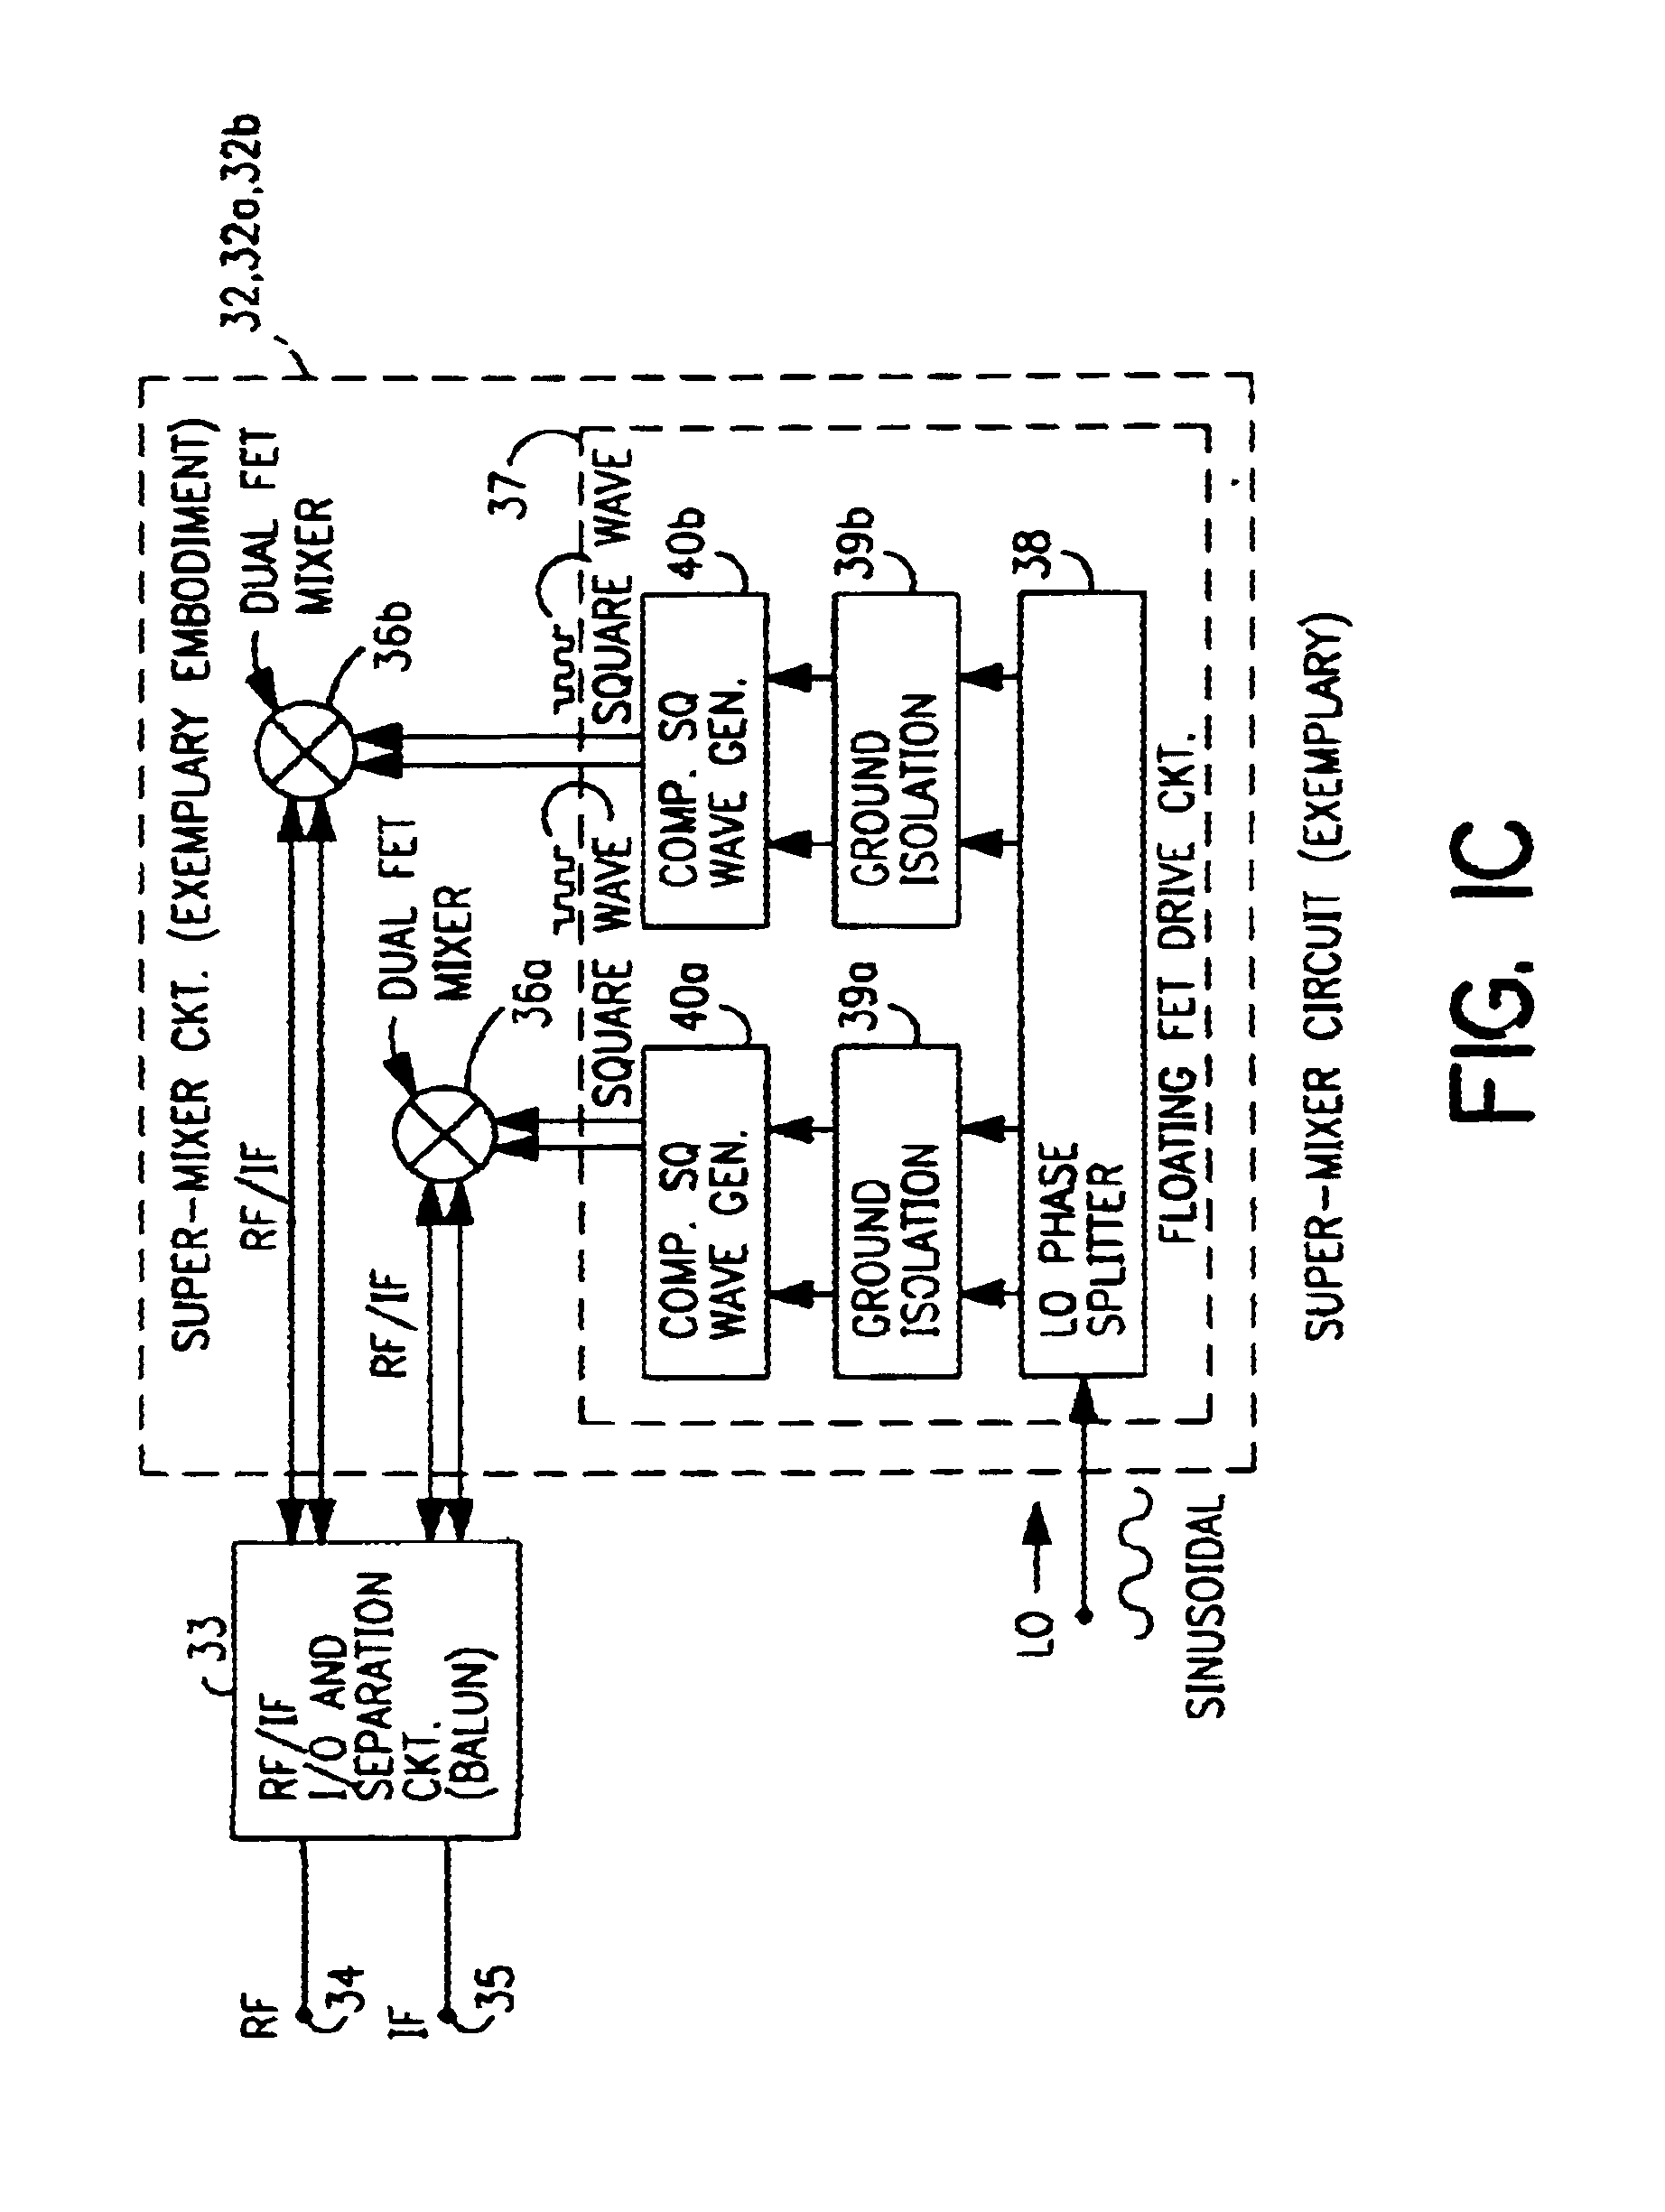 Radio system including mixer device and switching circuit and method having switching signal feedback control for enhanced dynamic range and performance